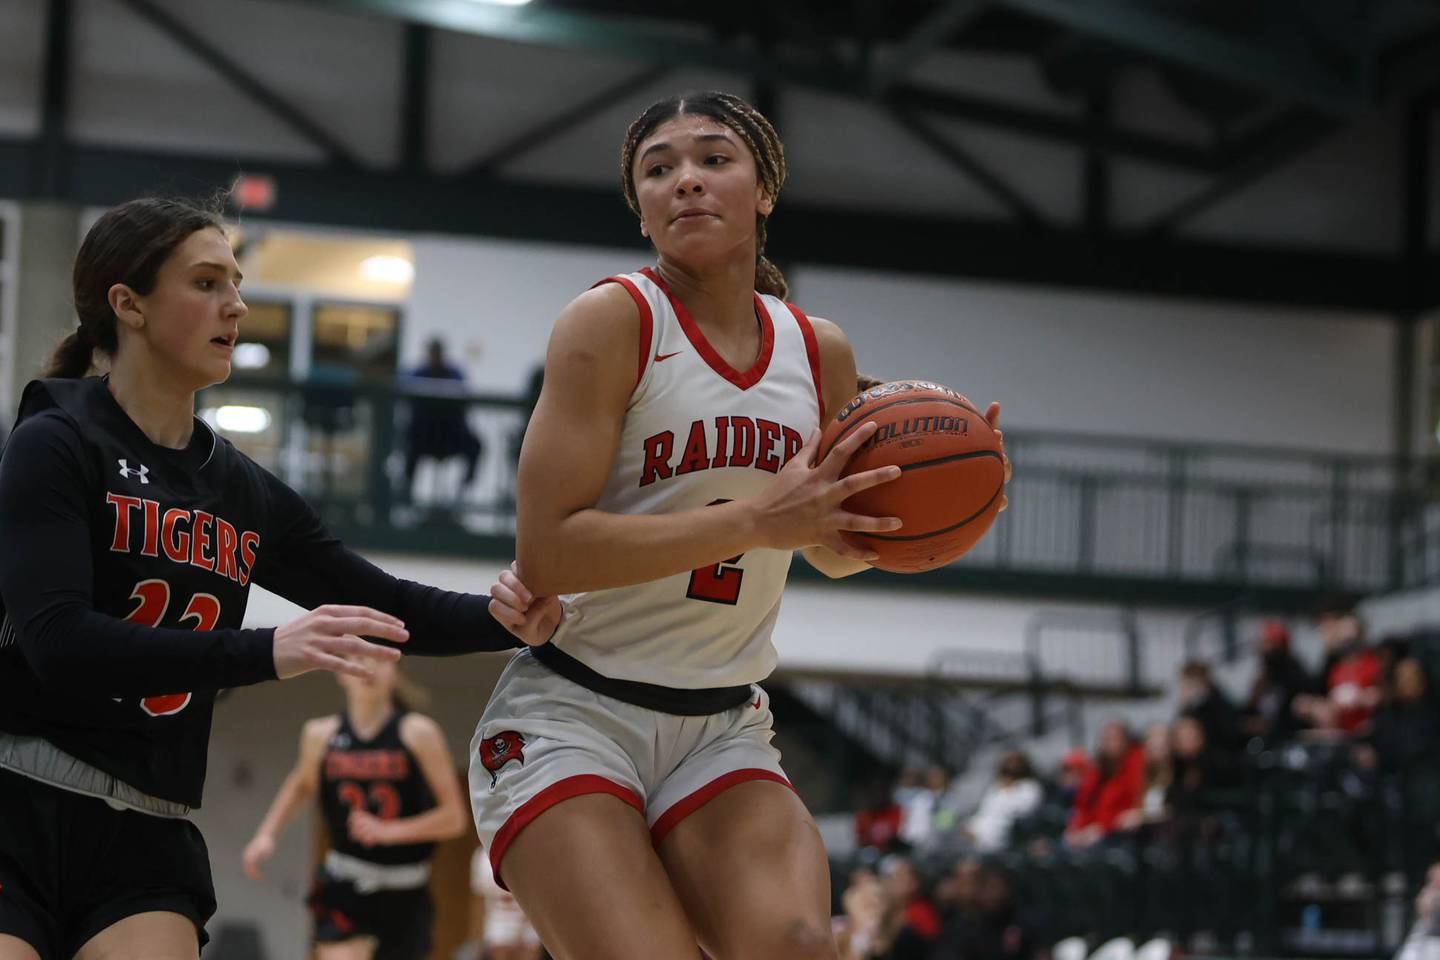 Bolingbrook’s Tatiana Thomas looks to make a play against Edwardsville in the Class 4A Illinois Wesleyan Super-sectional. Friday, Feb. 25, 2022, in Bloomington.